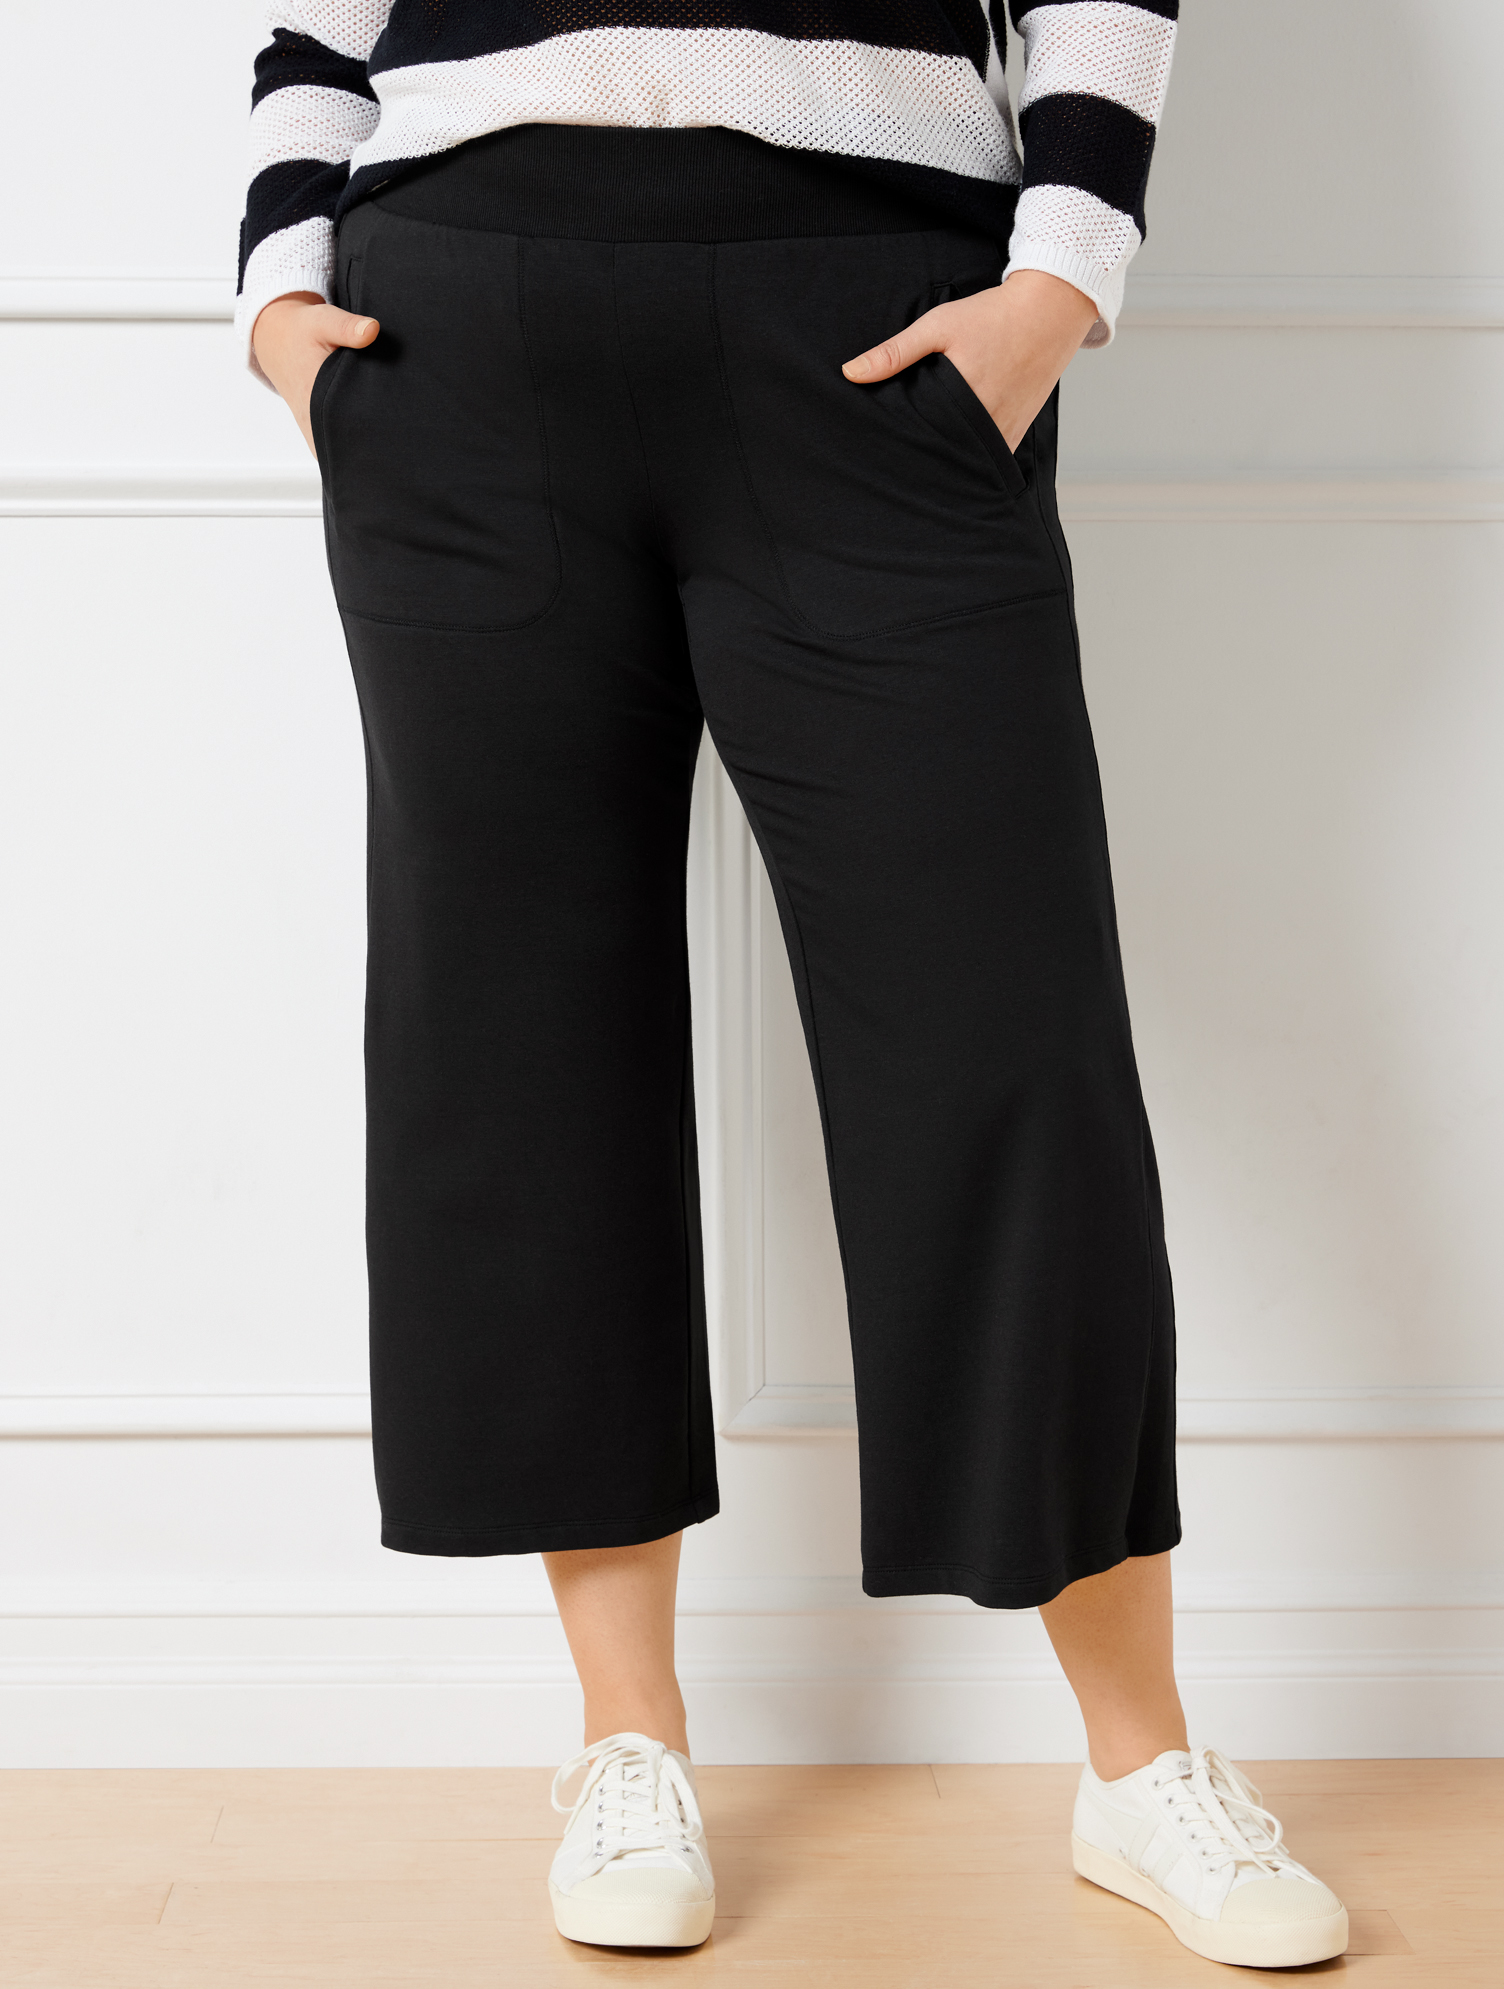 Talbots Modal French Terry Wide Crop Pants - Black - 1x